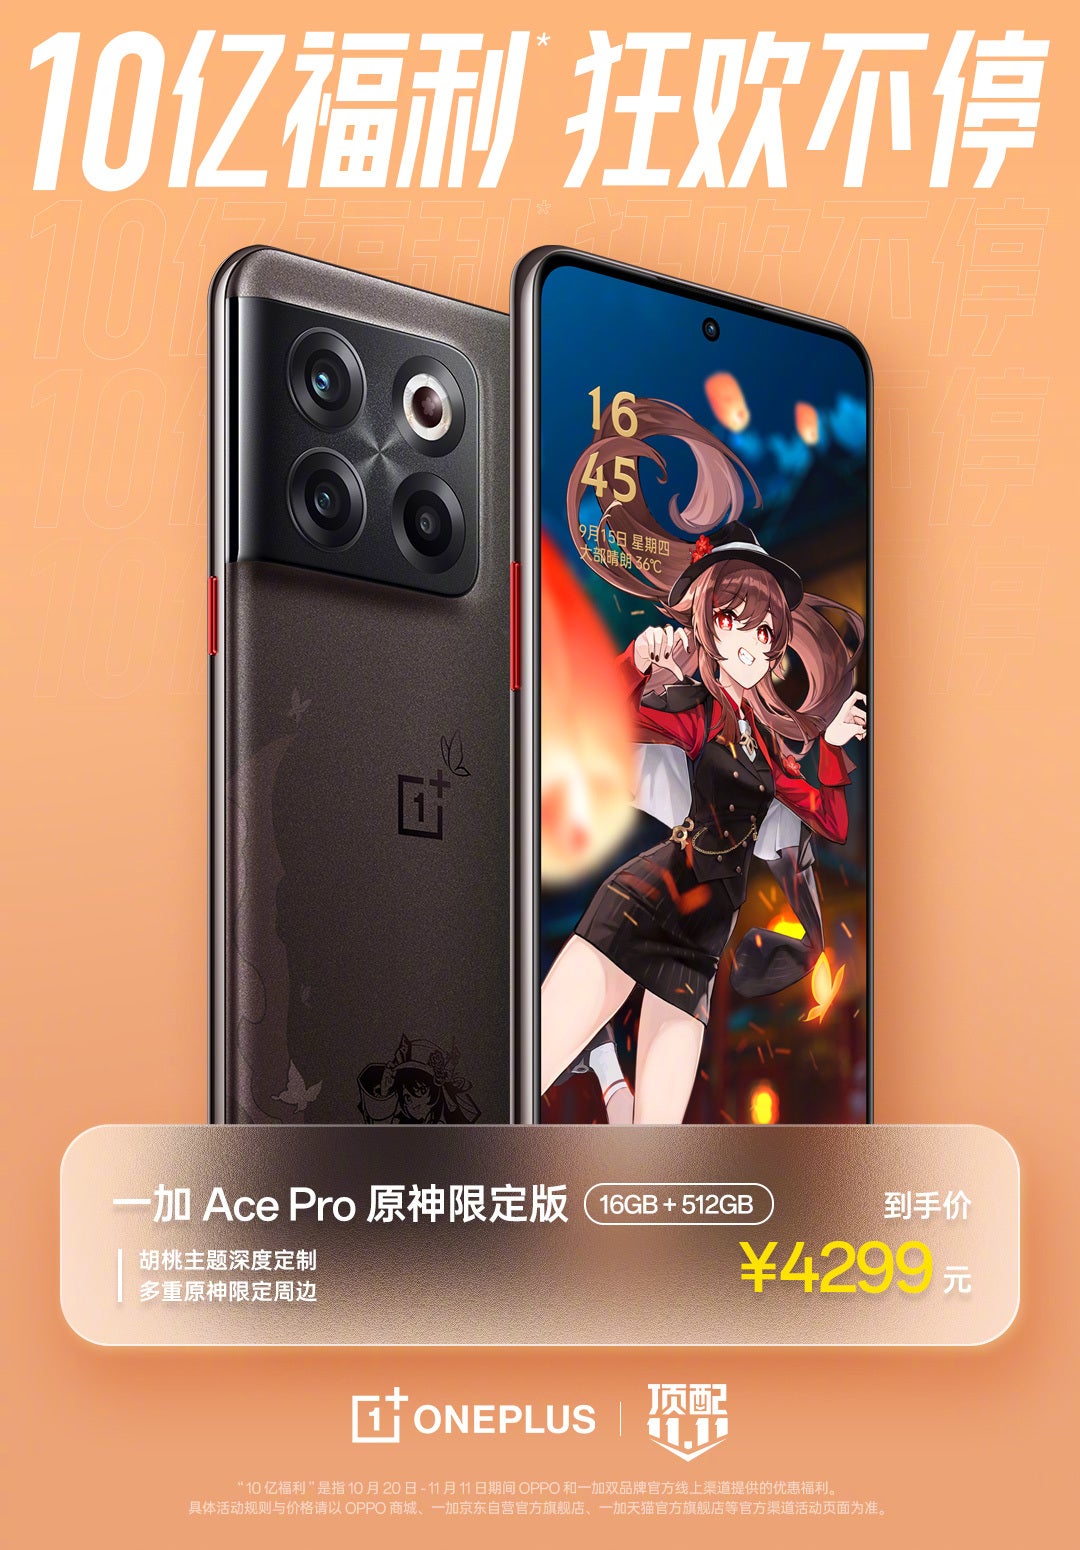 OnePlus’ newest phone is a collaboration with one of the biggest gacha games